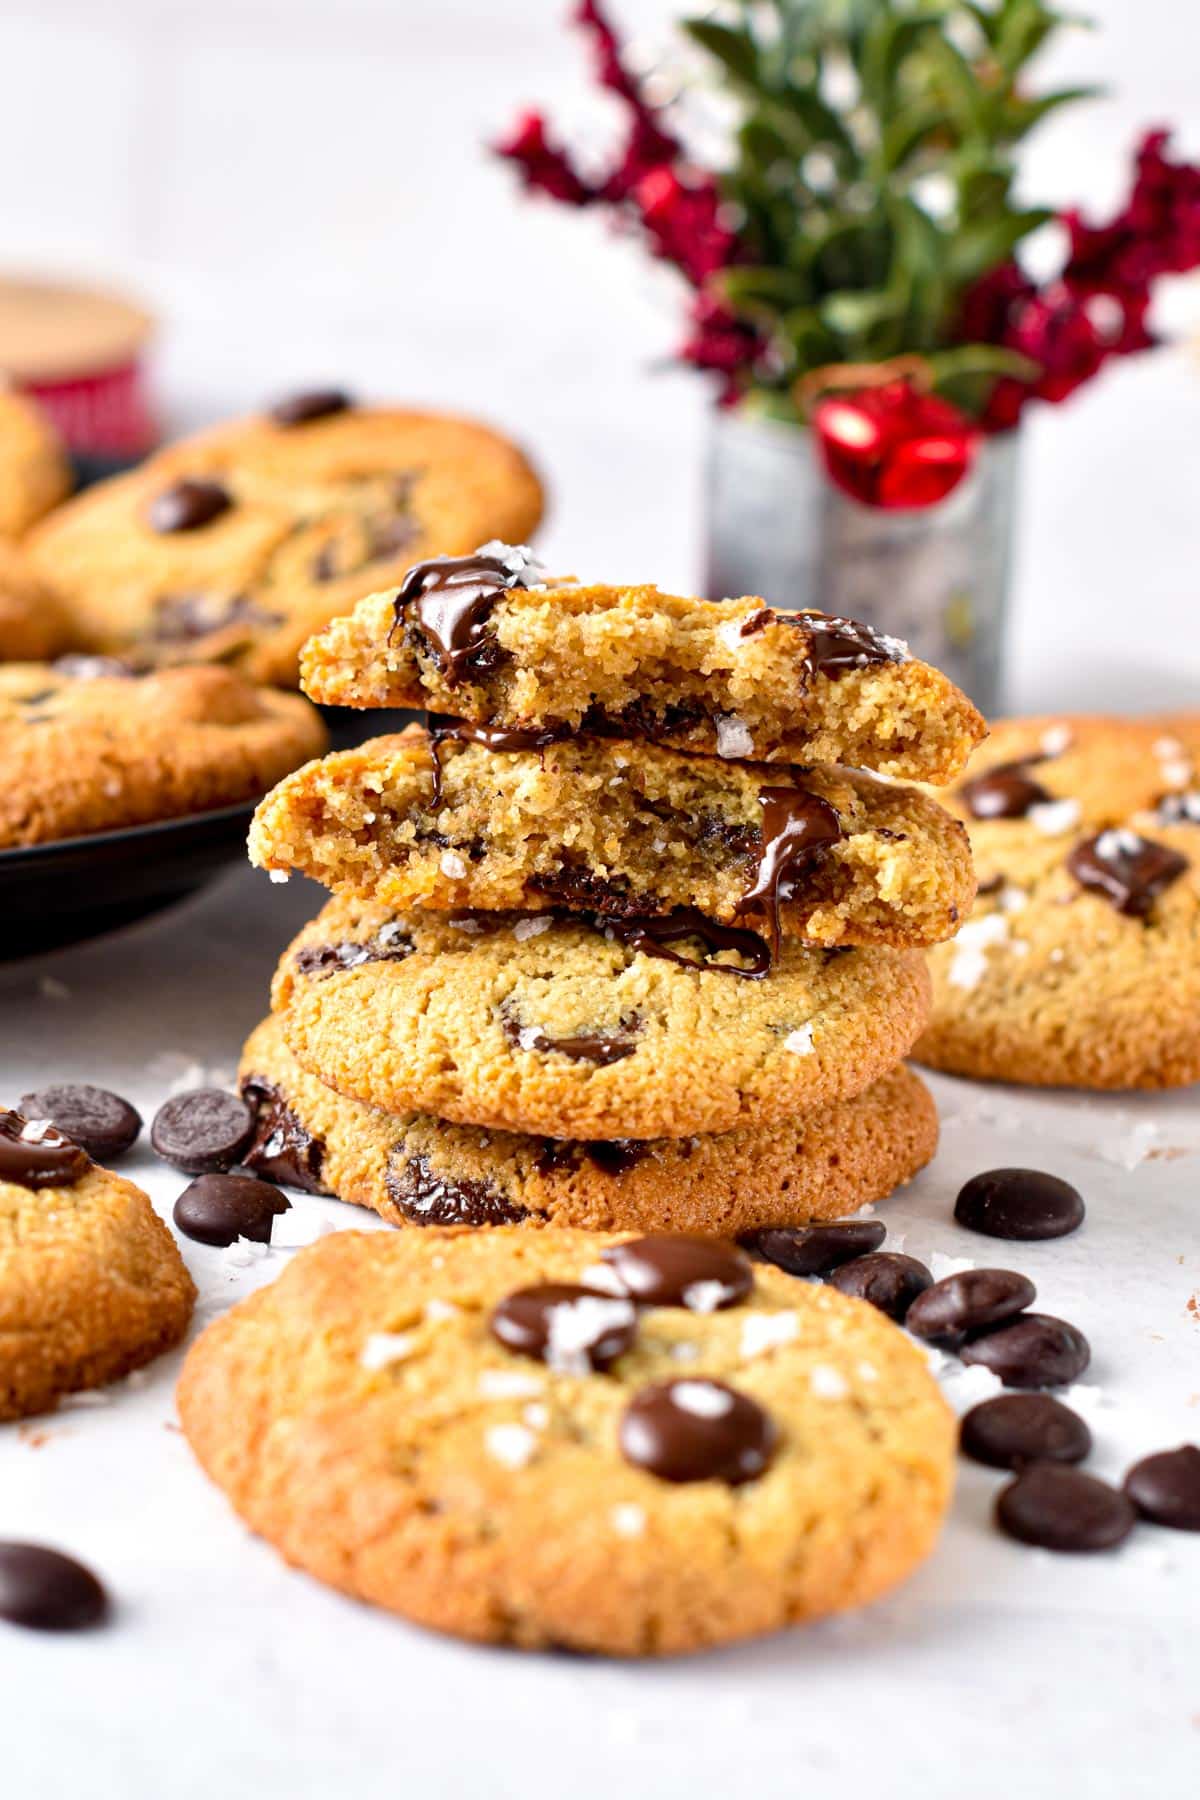 A stack of Almond Flour Chocolate Chip Cookies with two cookies split in half on top of the stack showing the cookie texture inside.